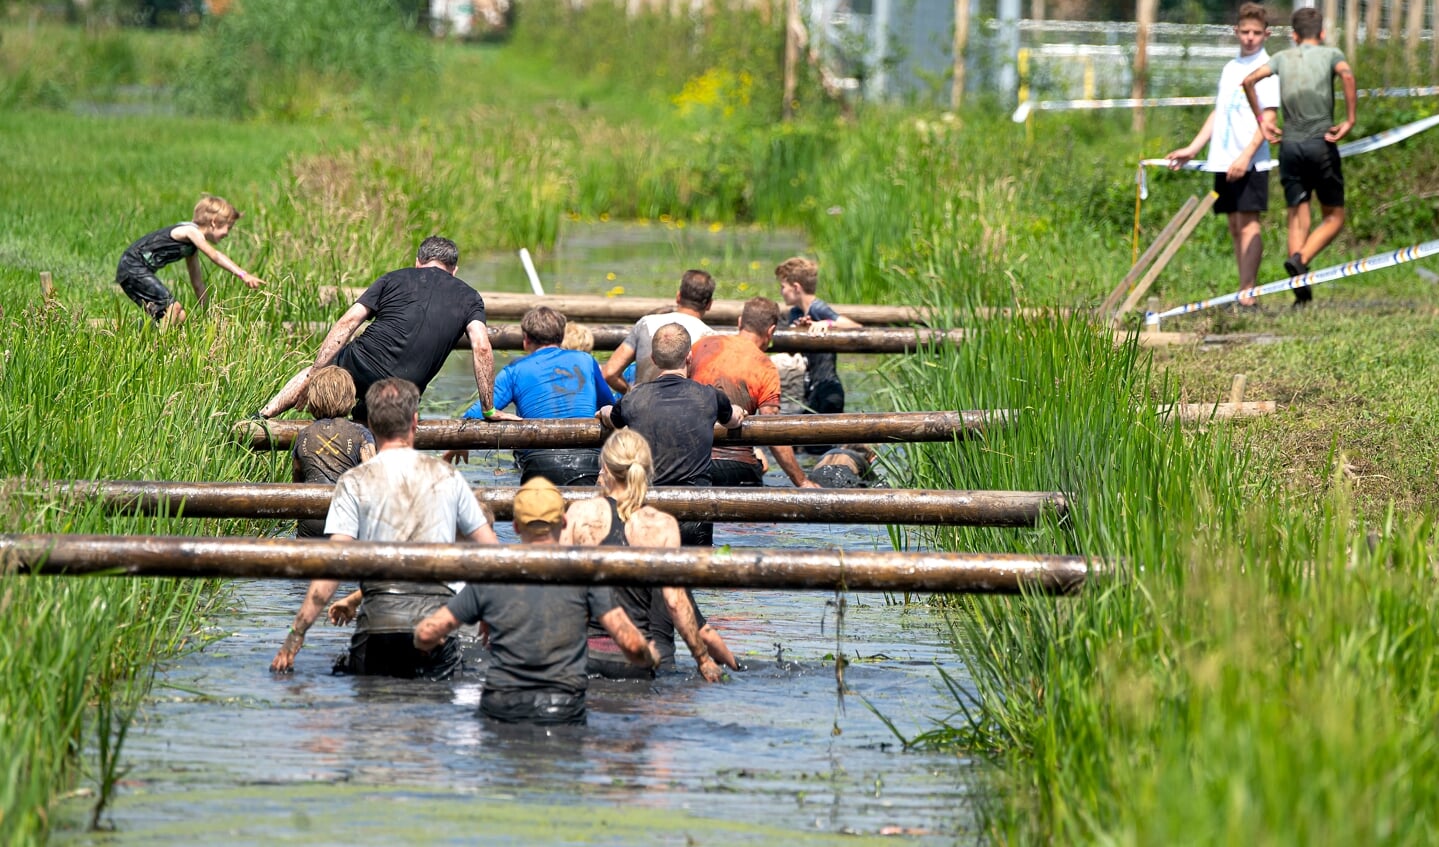 Glaspark Obstacle Run